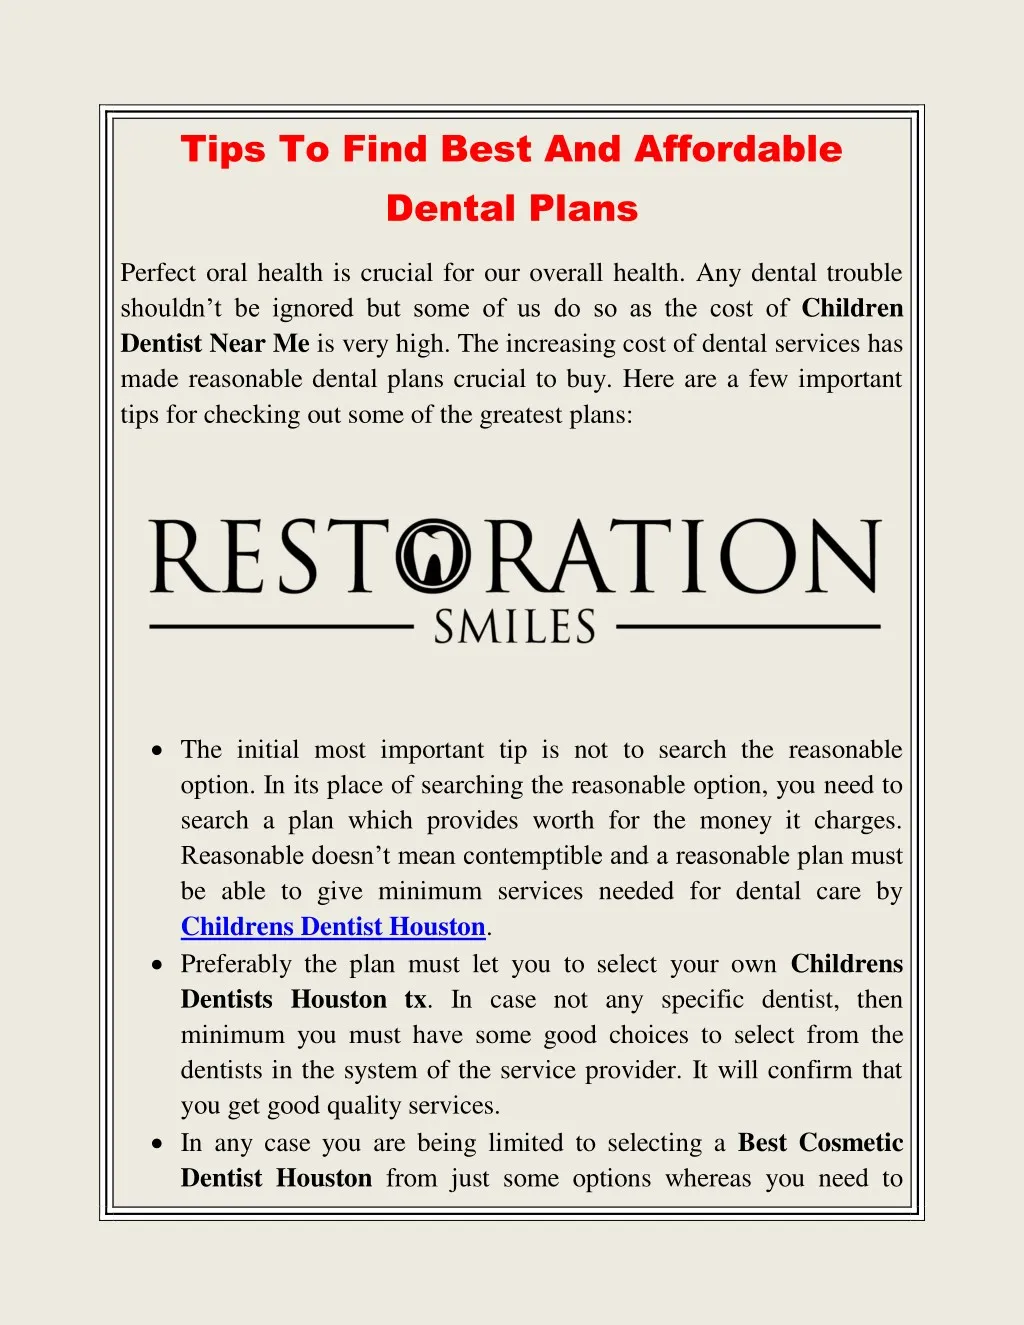 tips to find best and affordable dental plans